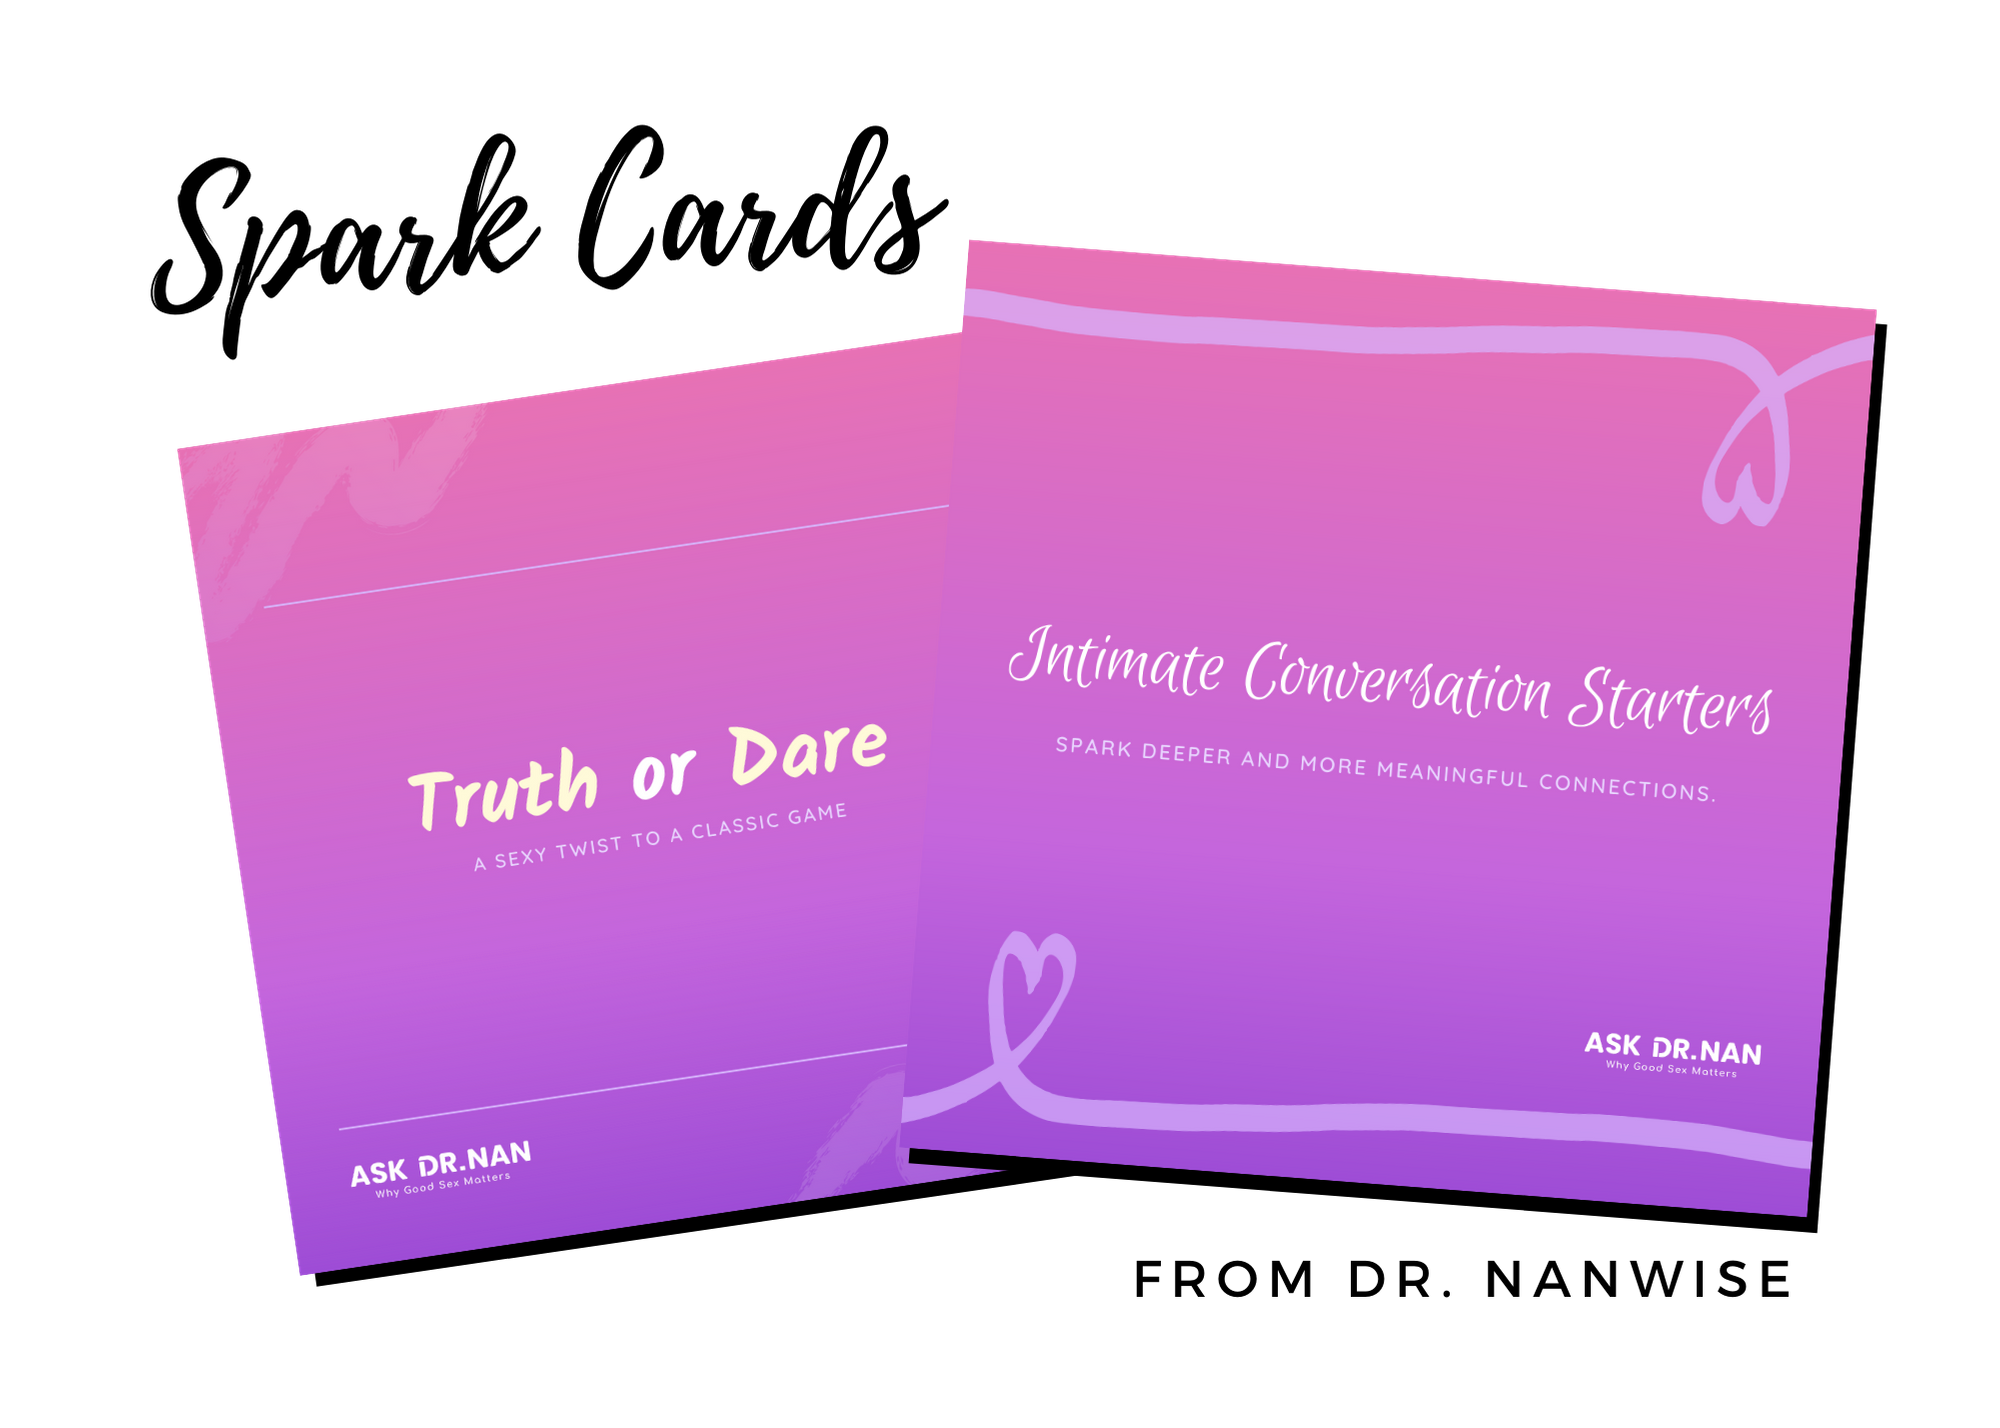 Spark Cards with truth or dare and intimate conversation starters.